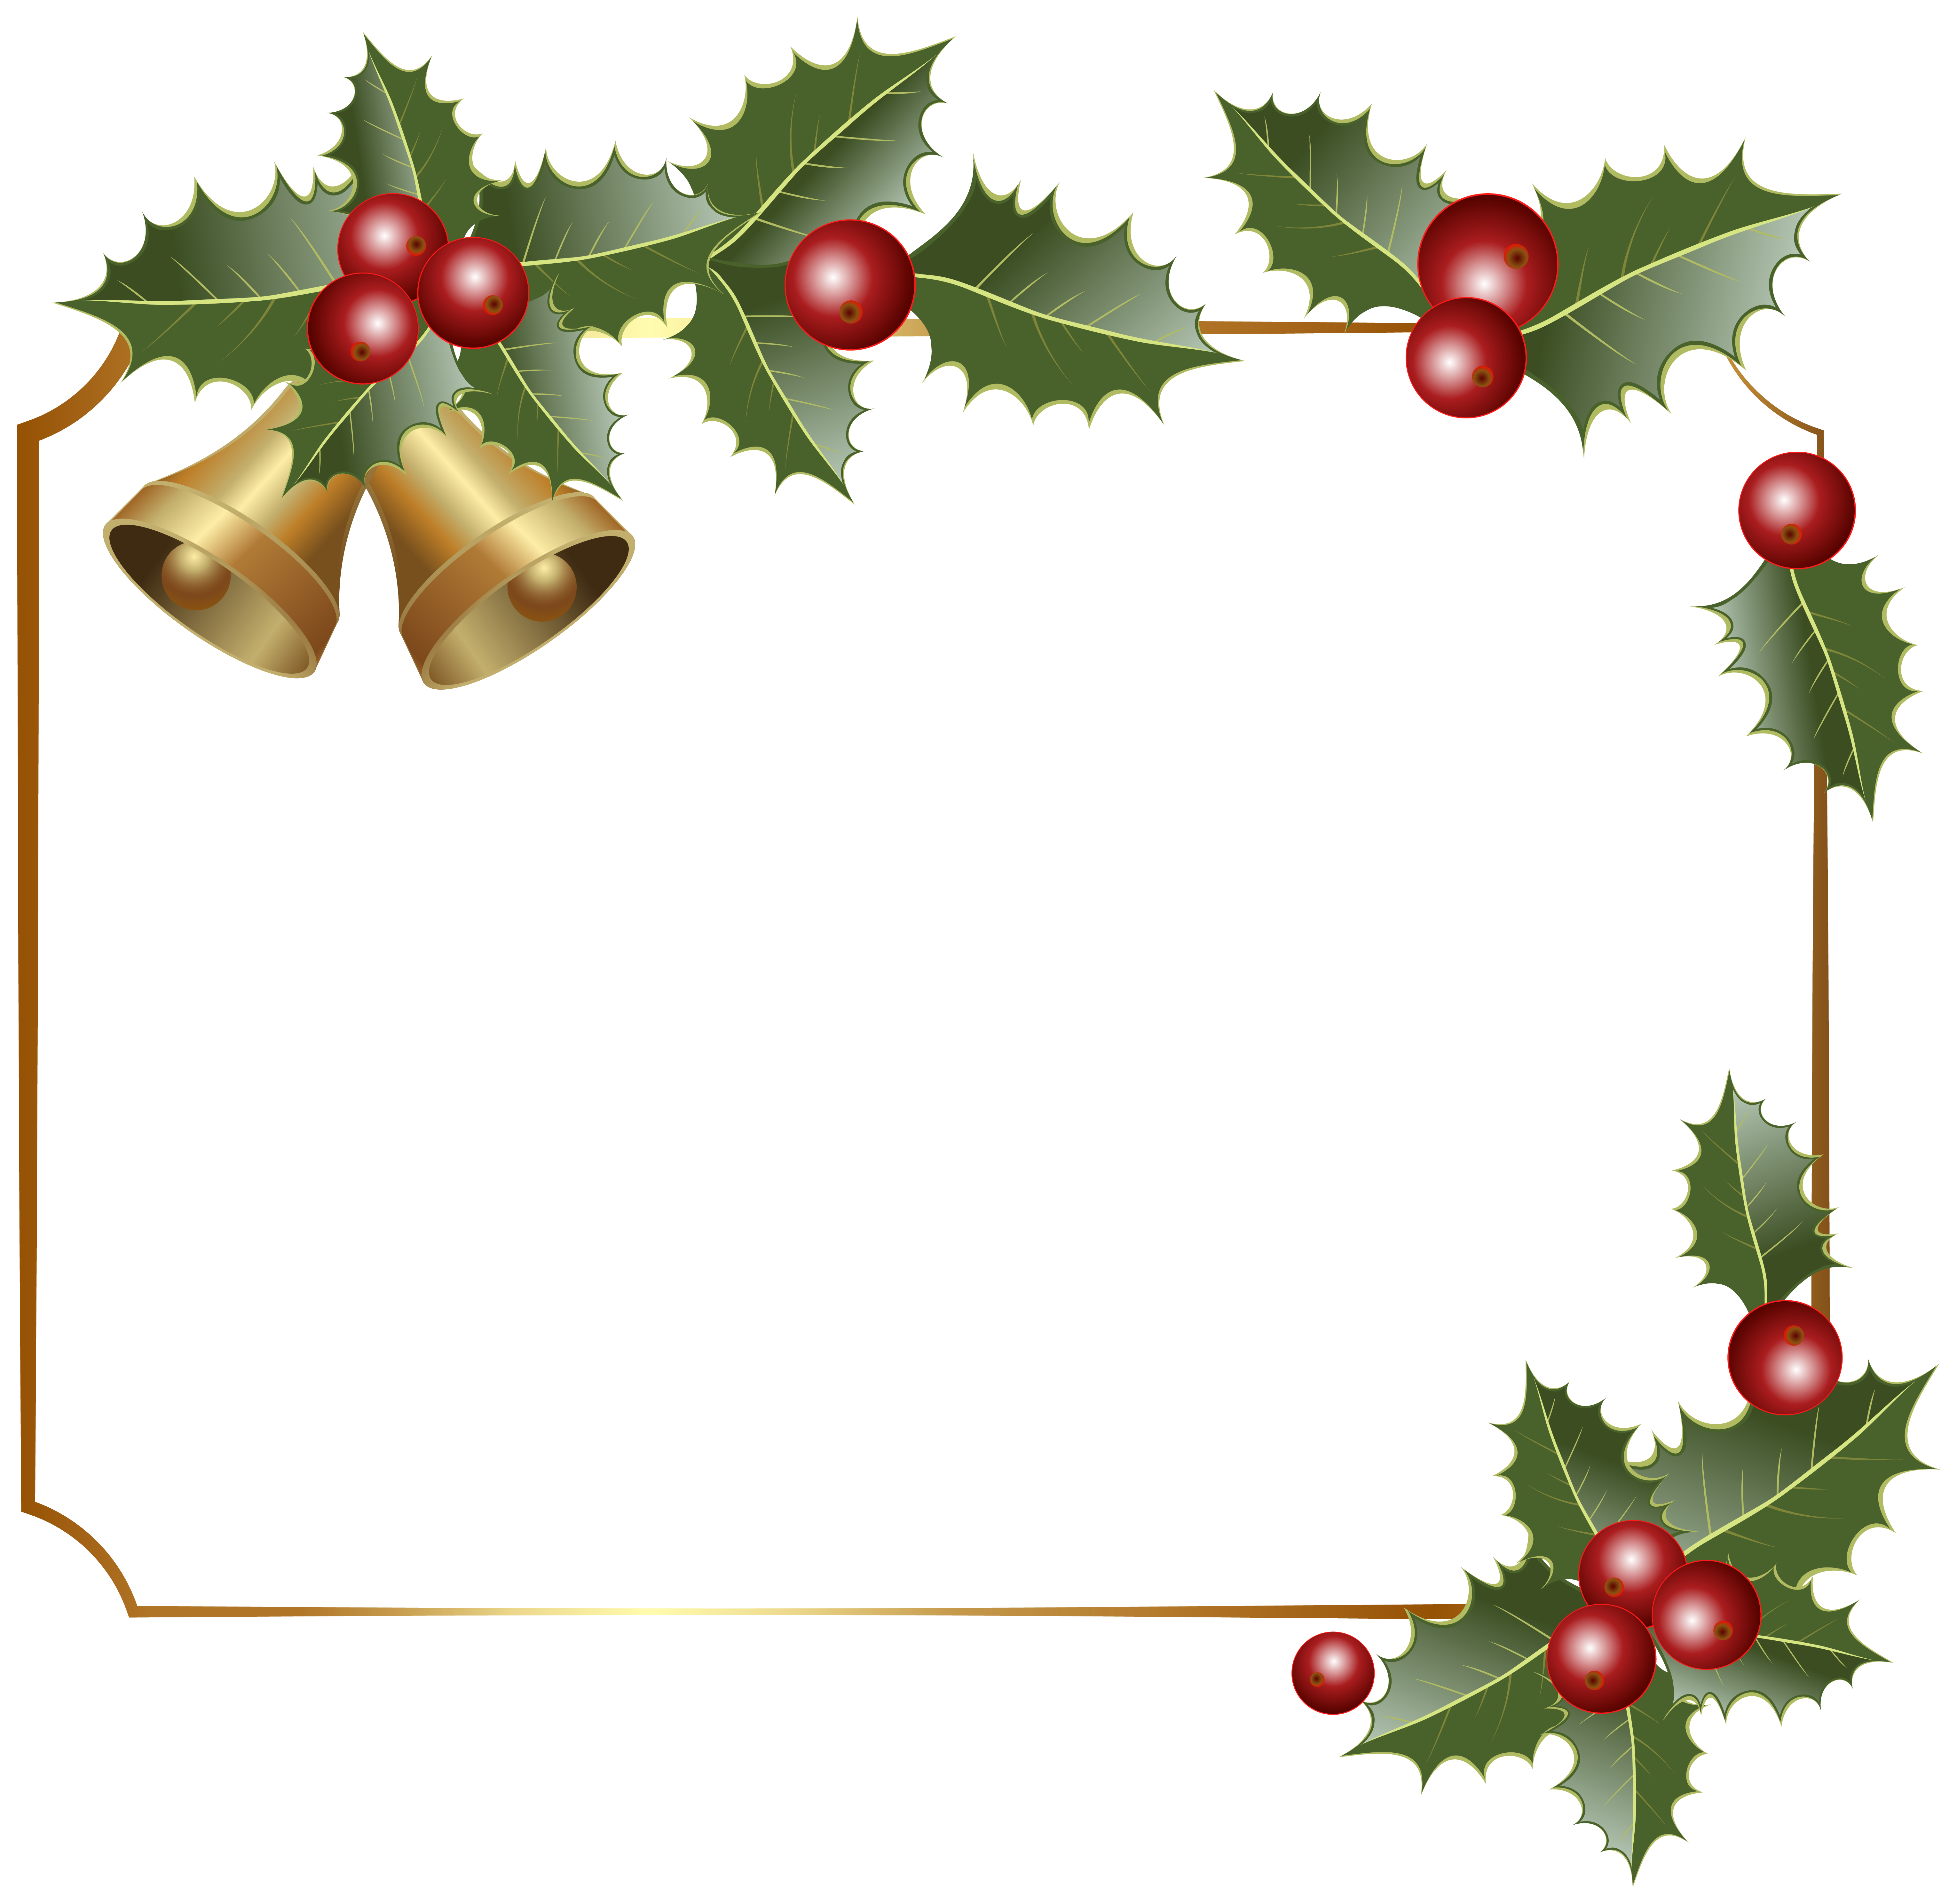 Download Free png Christmas Border Decor with Bells PNG